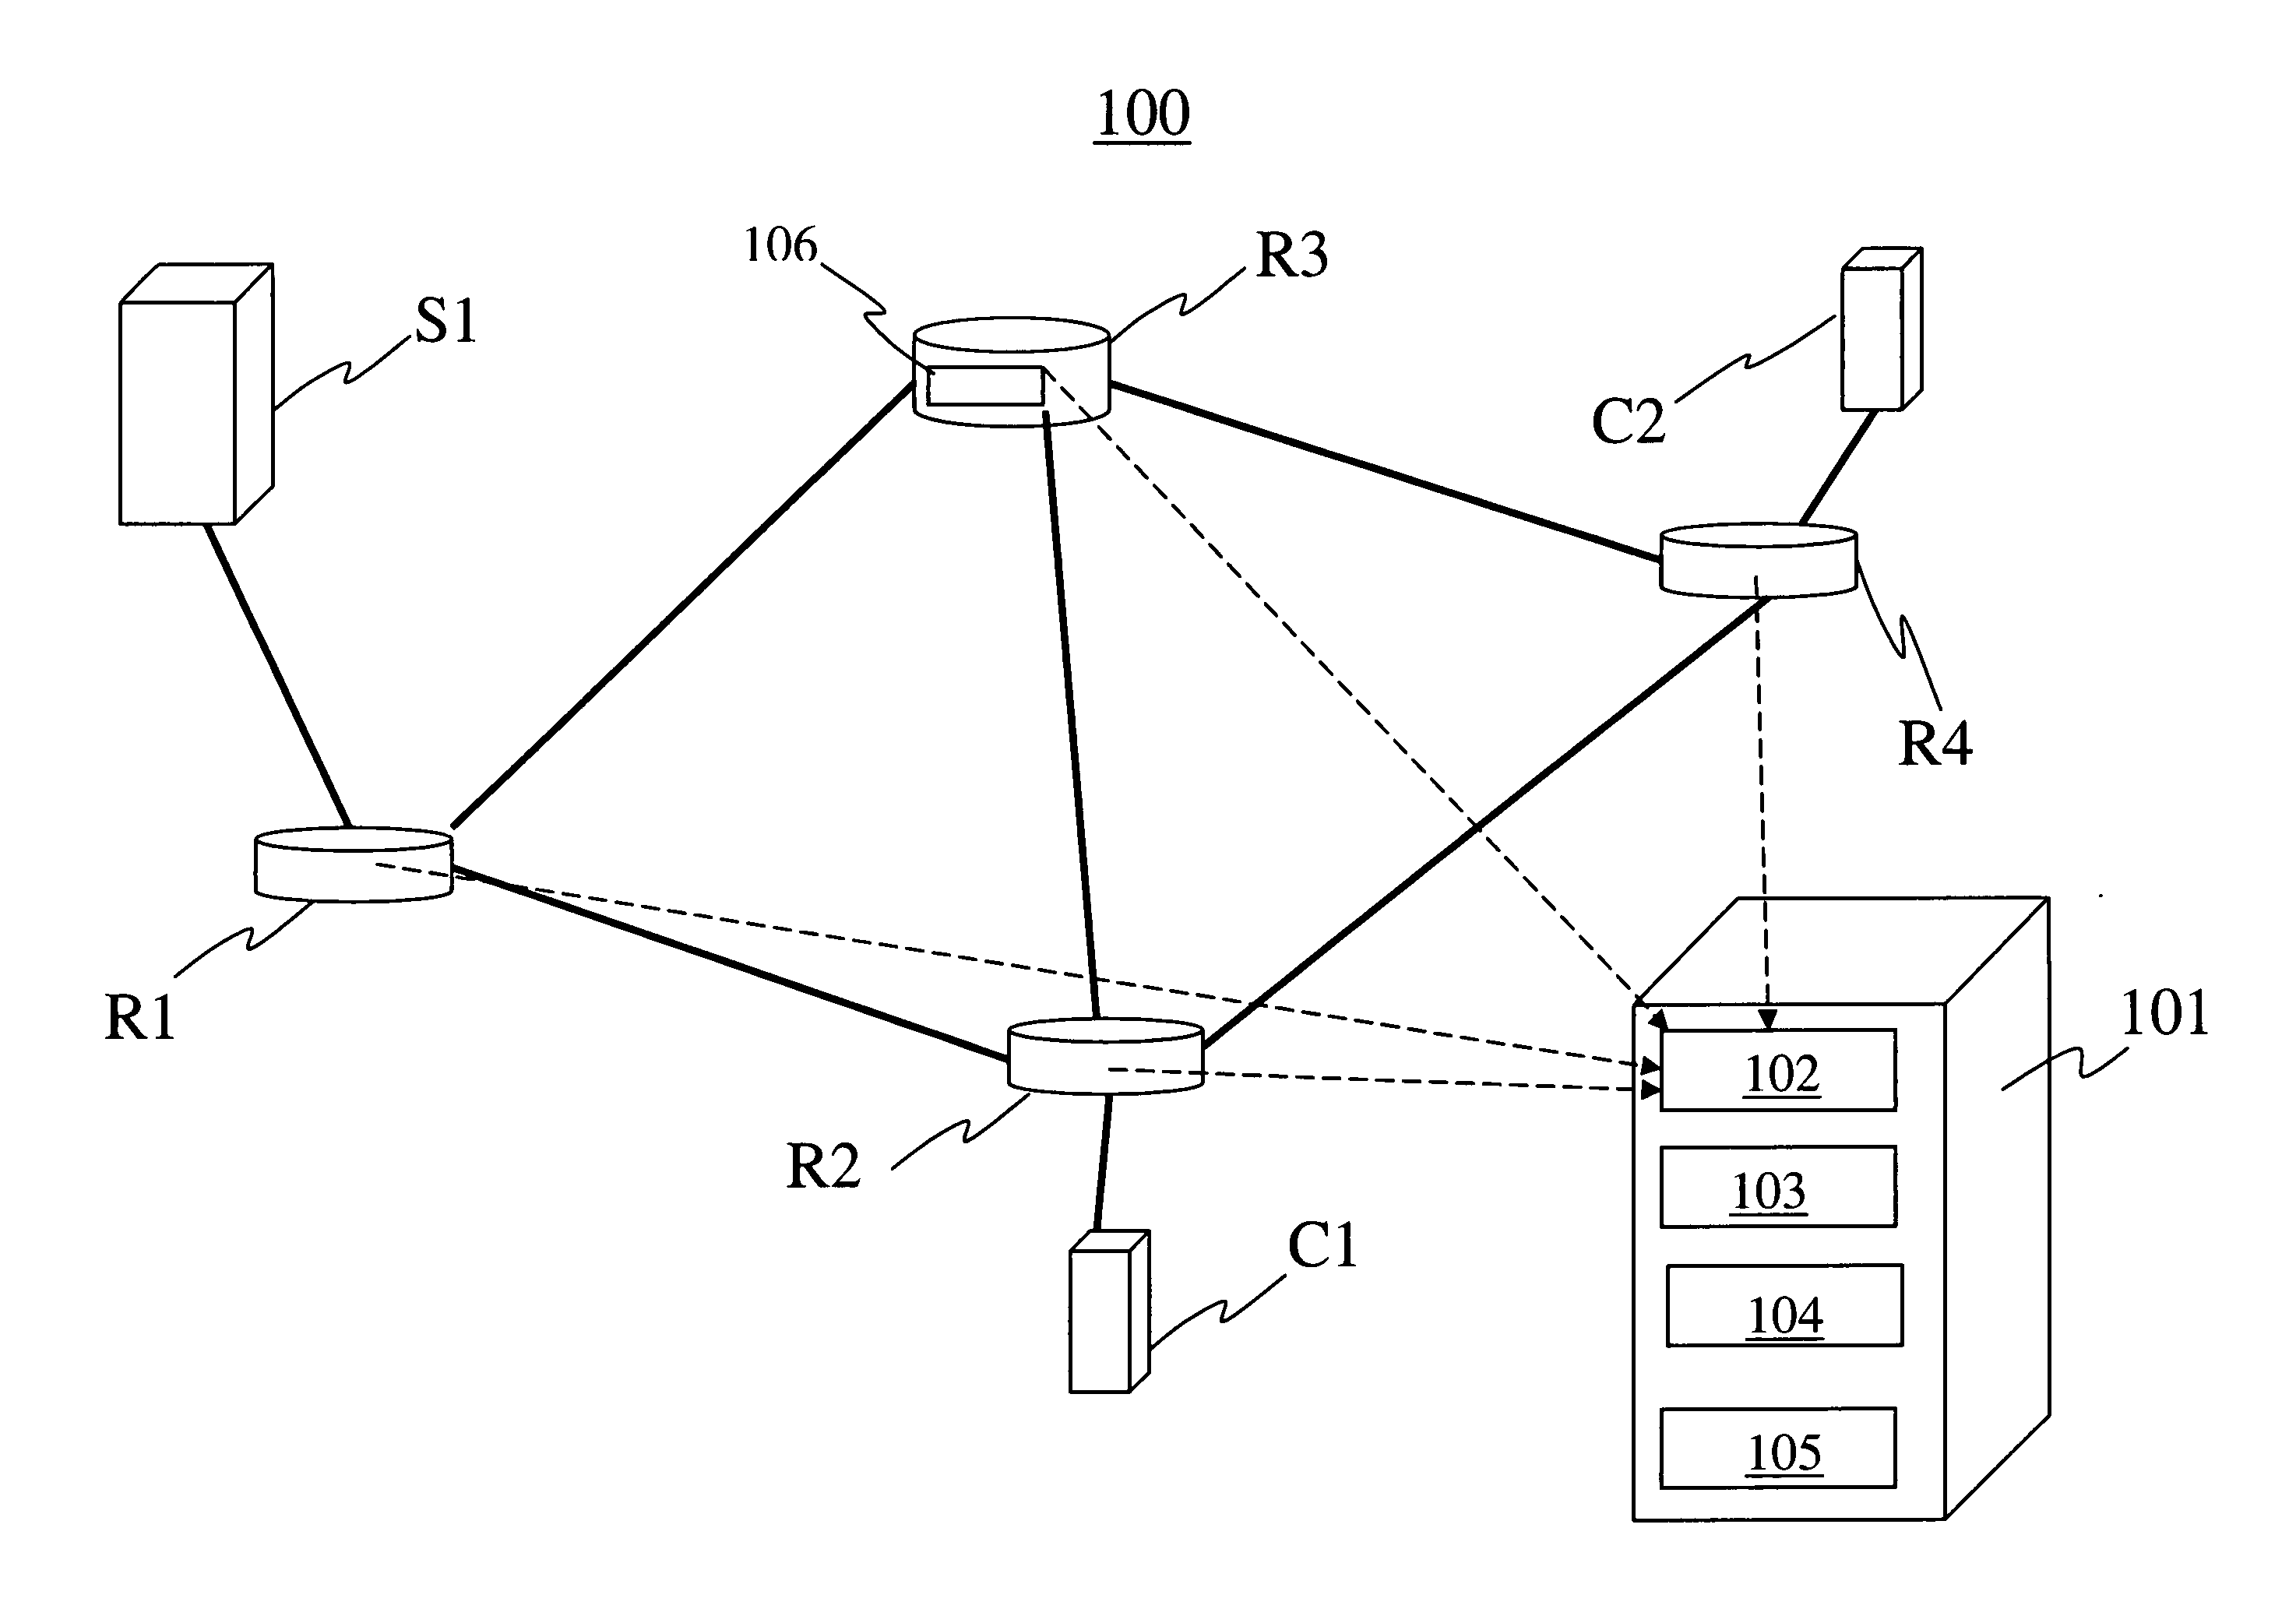 Method of detecting anomalies in a communication system using symbolic packet features